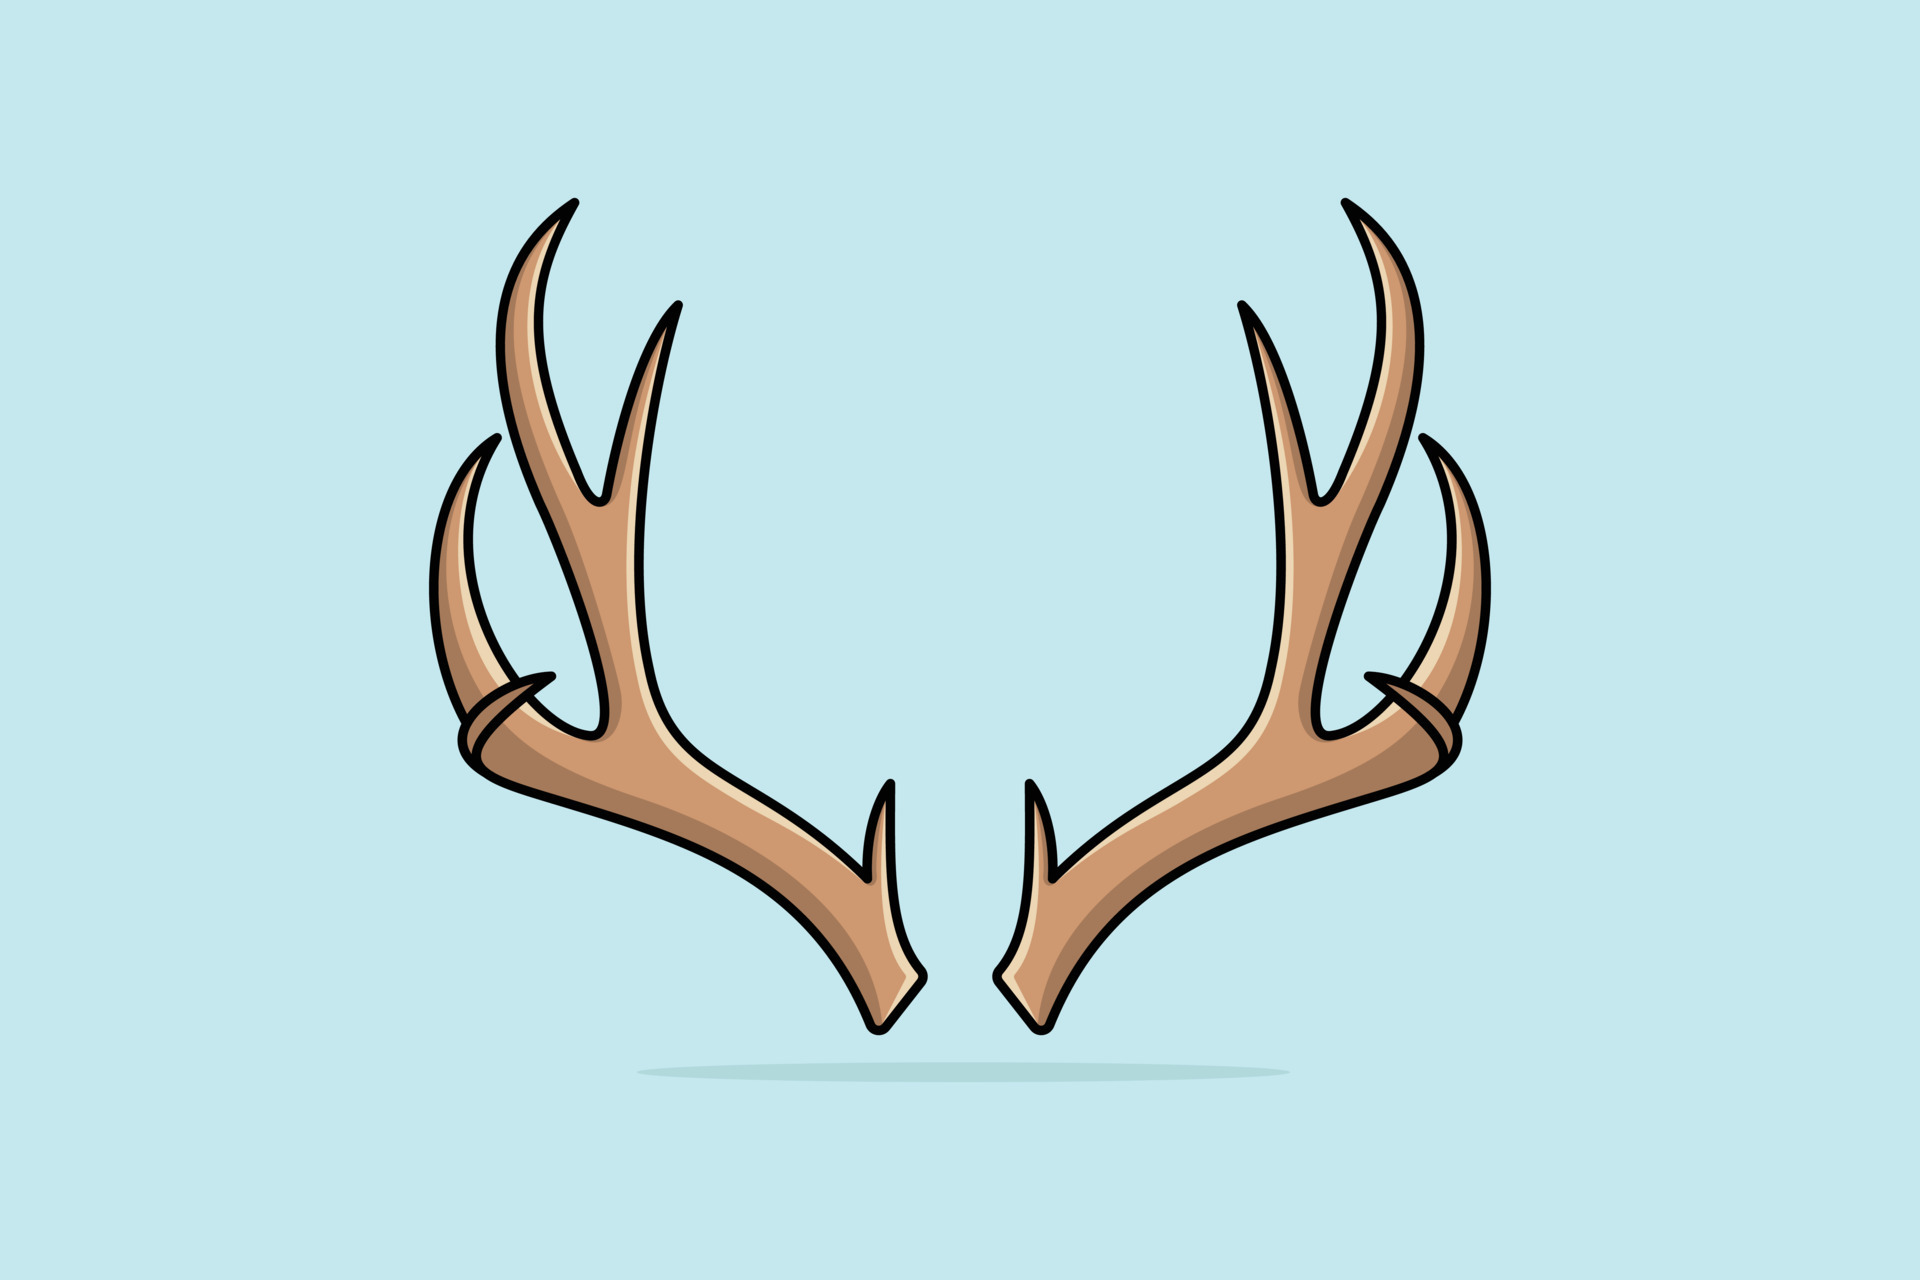 Deer Antler Horn vector icon illustration. Animal objects icon